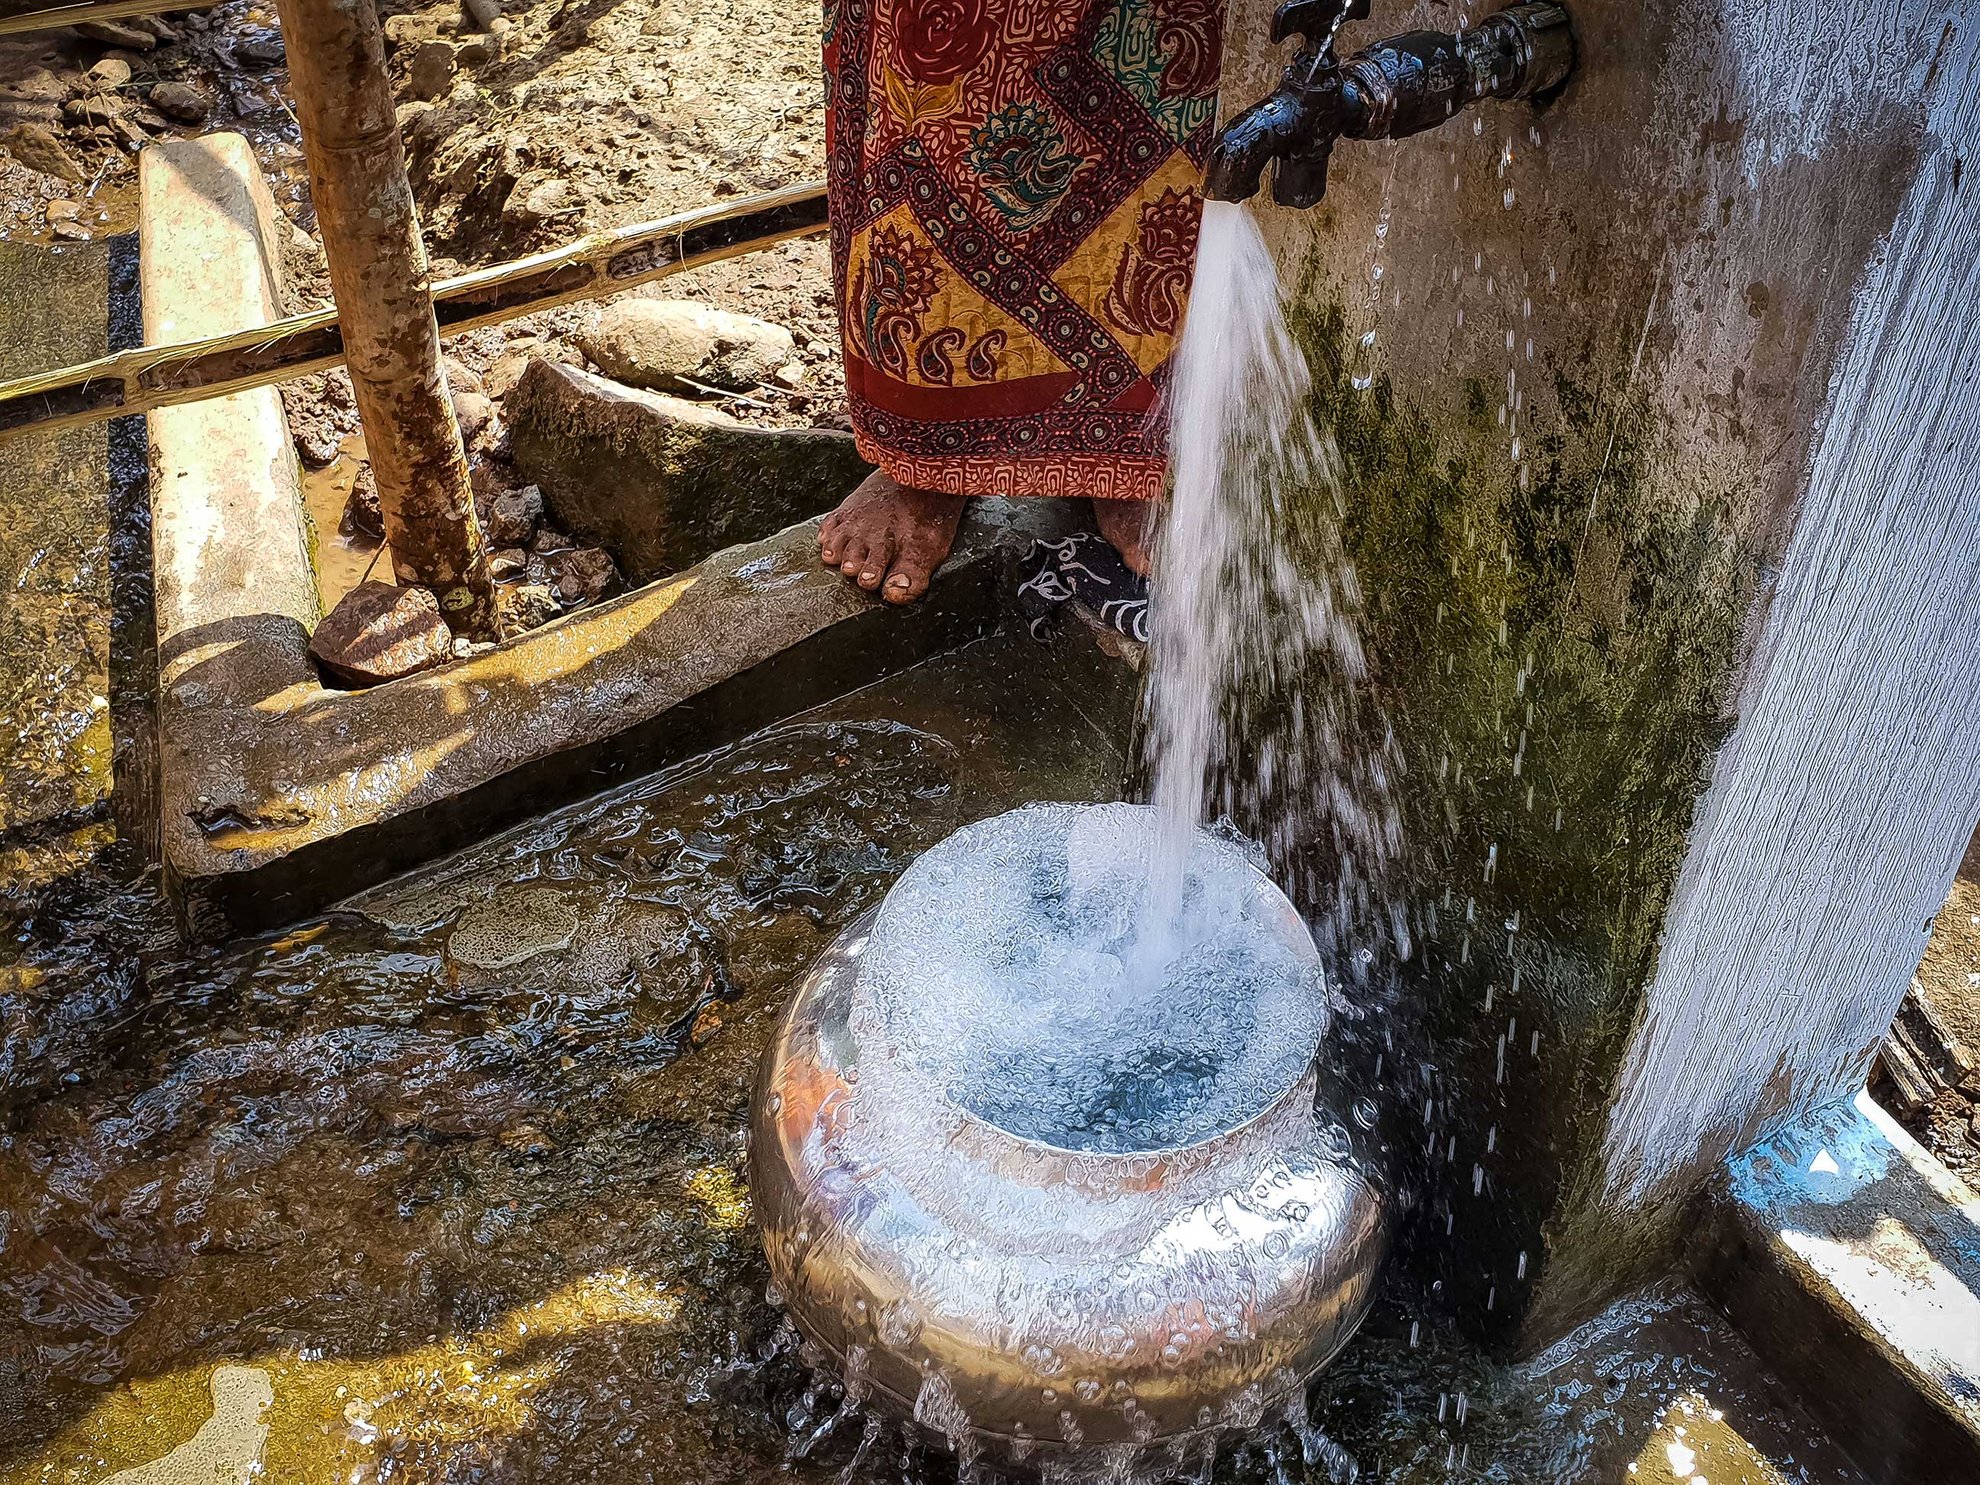 Clean water supply in the village